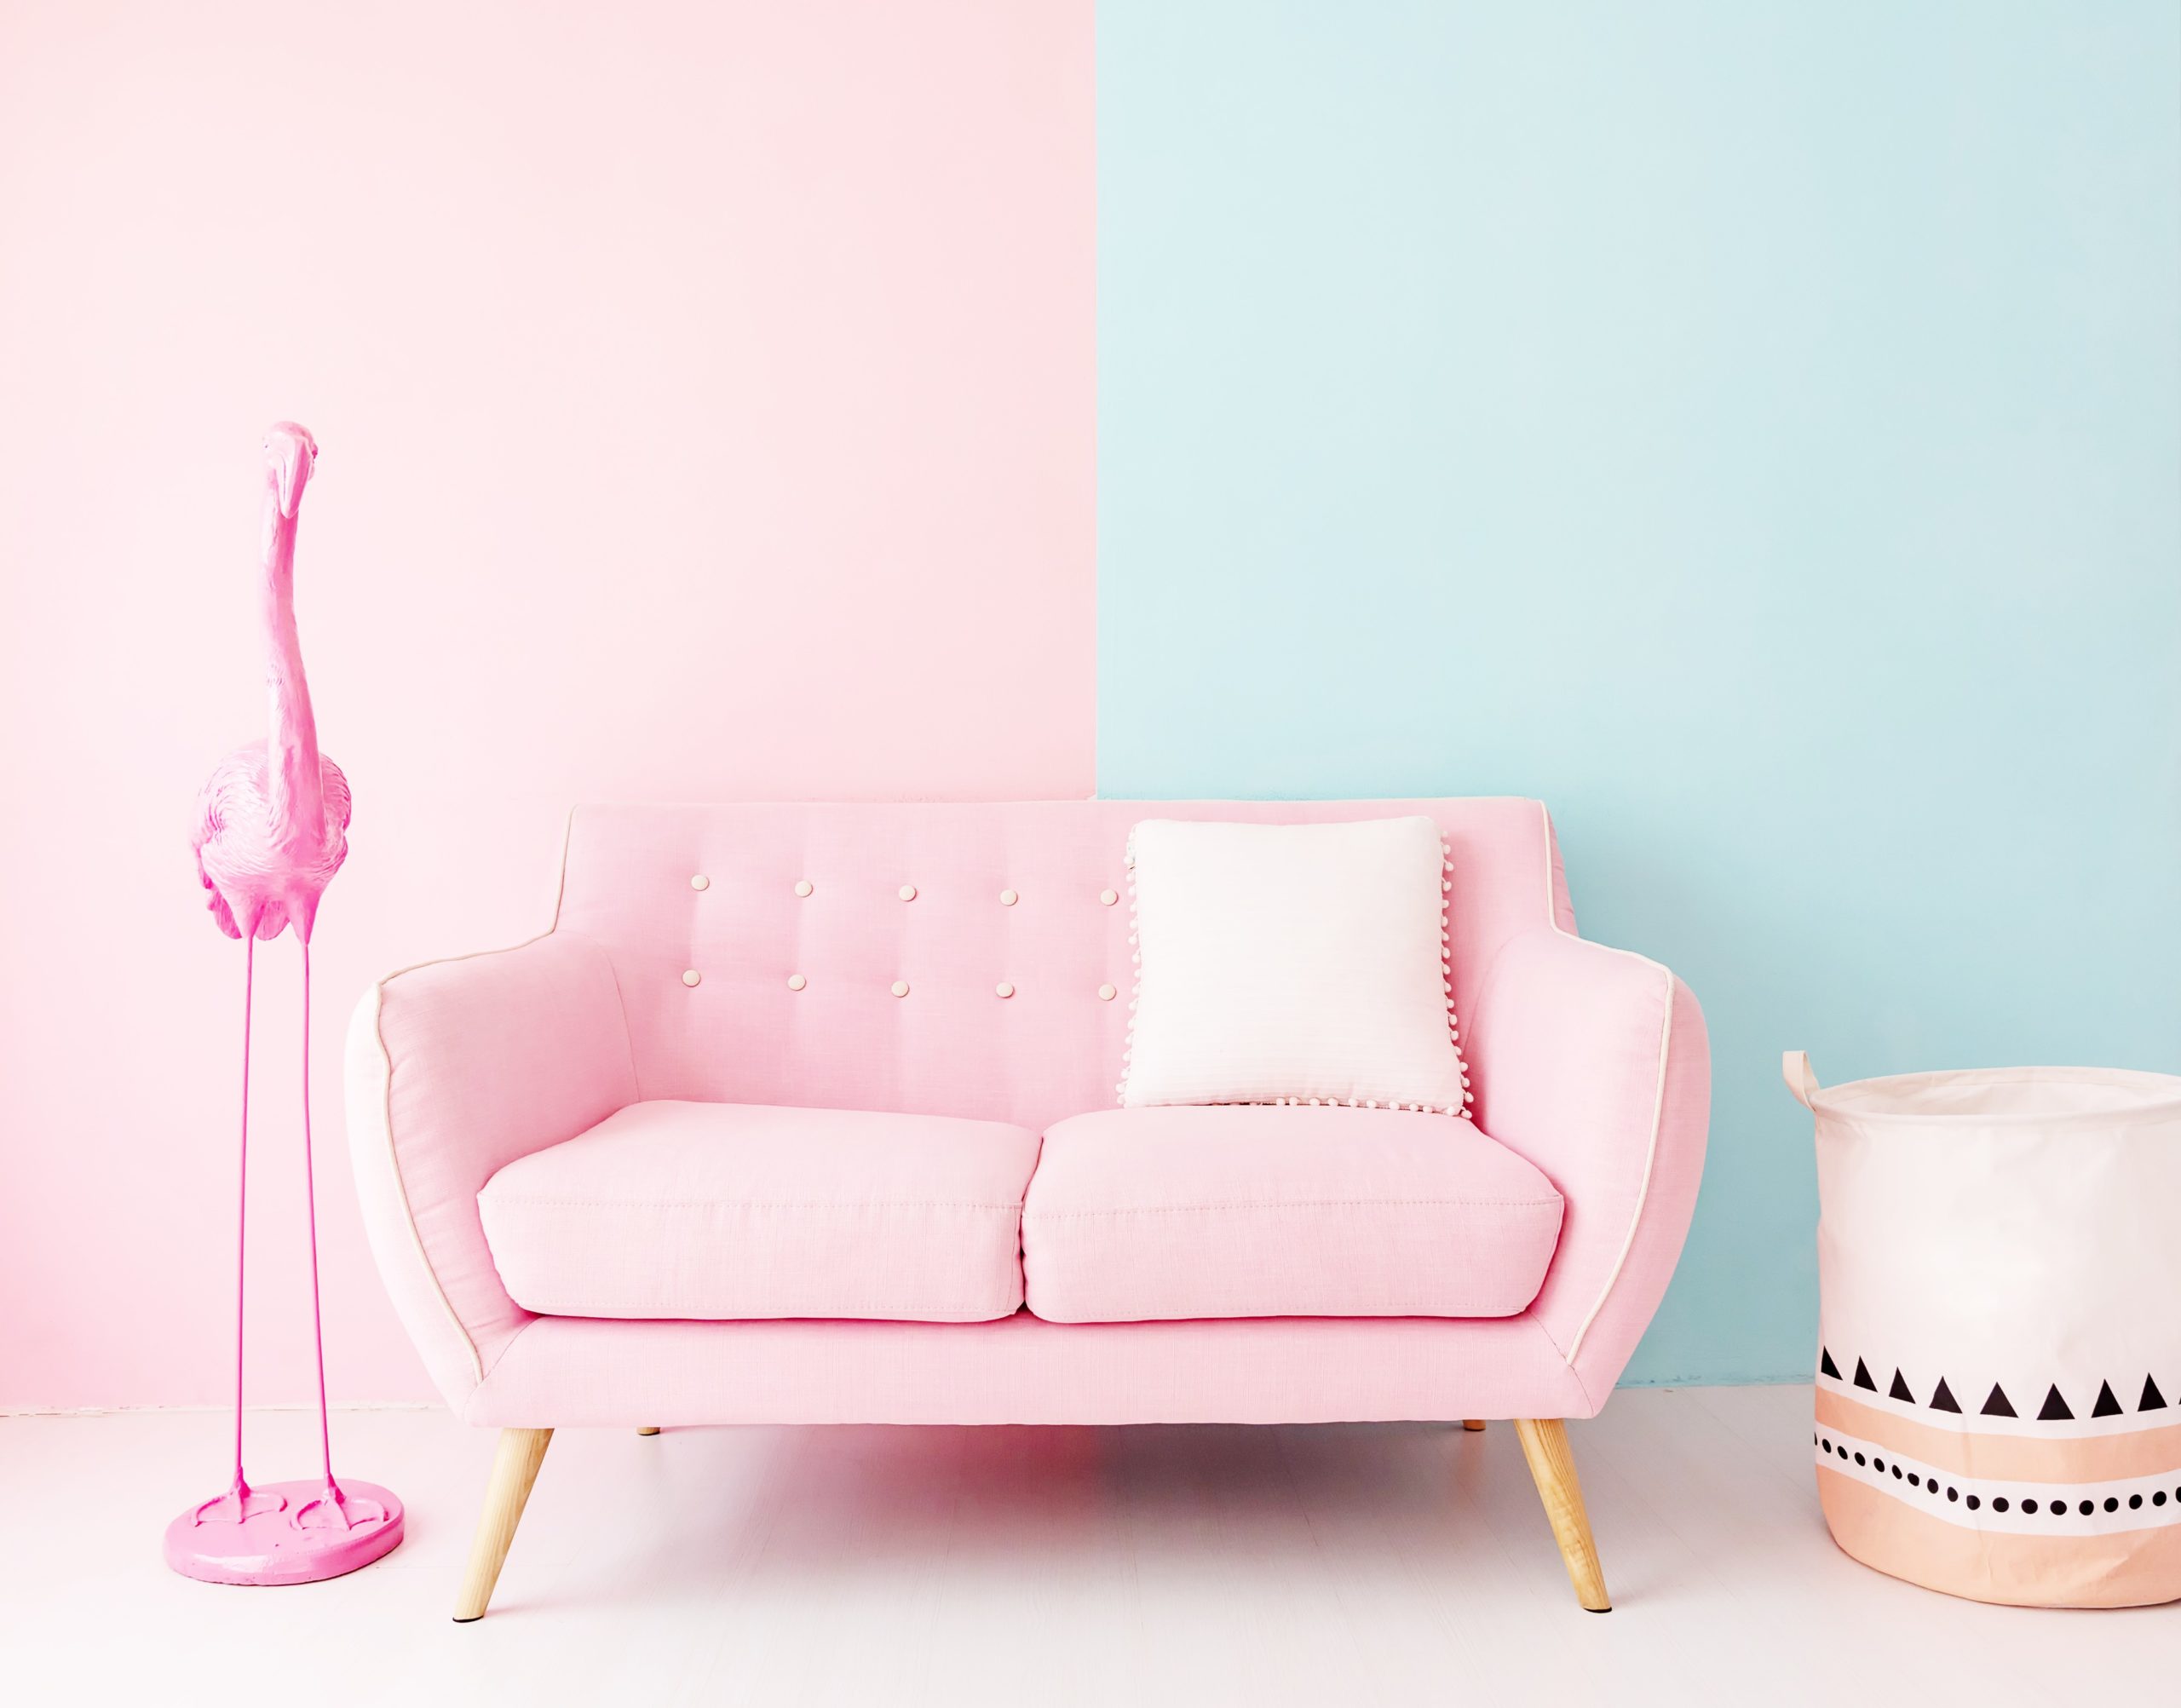 <img src="pink.jpg" alt="pink sofa on blue and pink wall"/> 